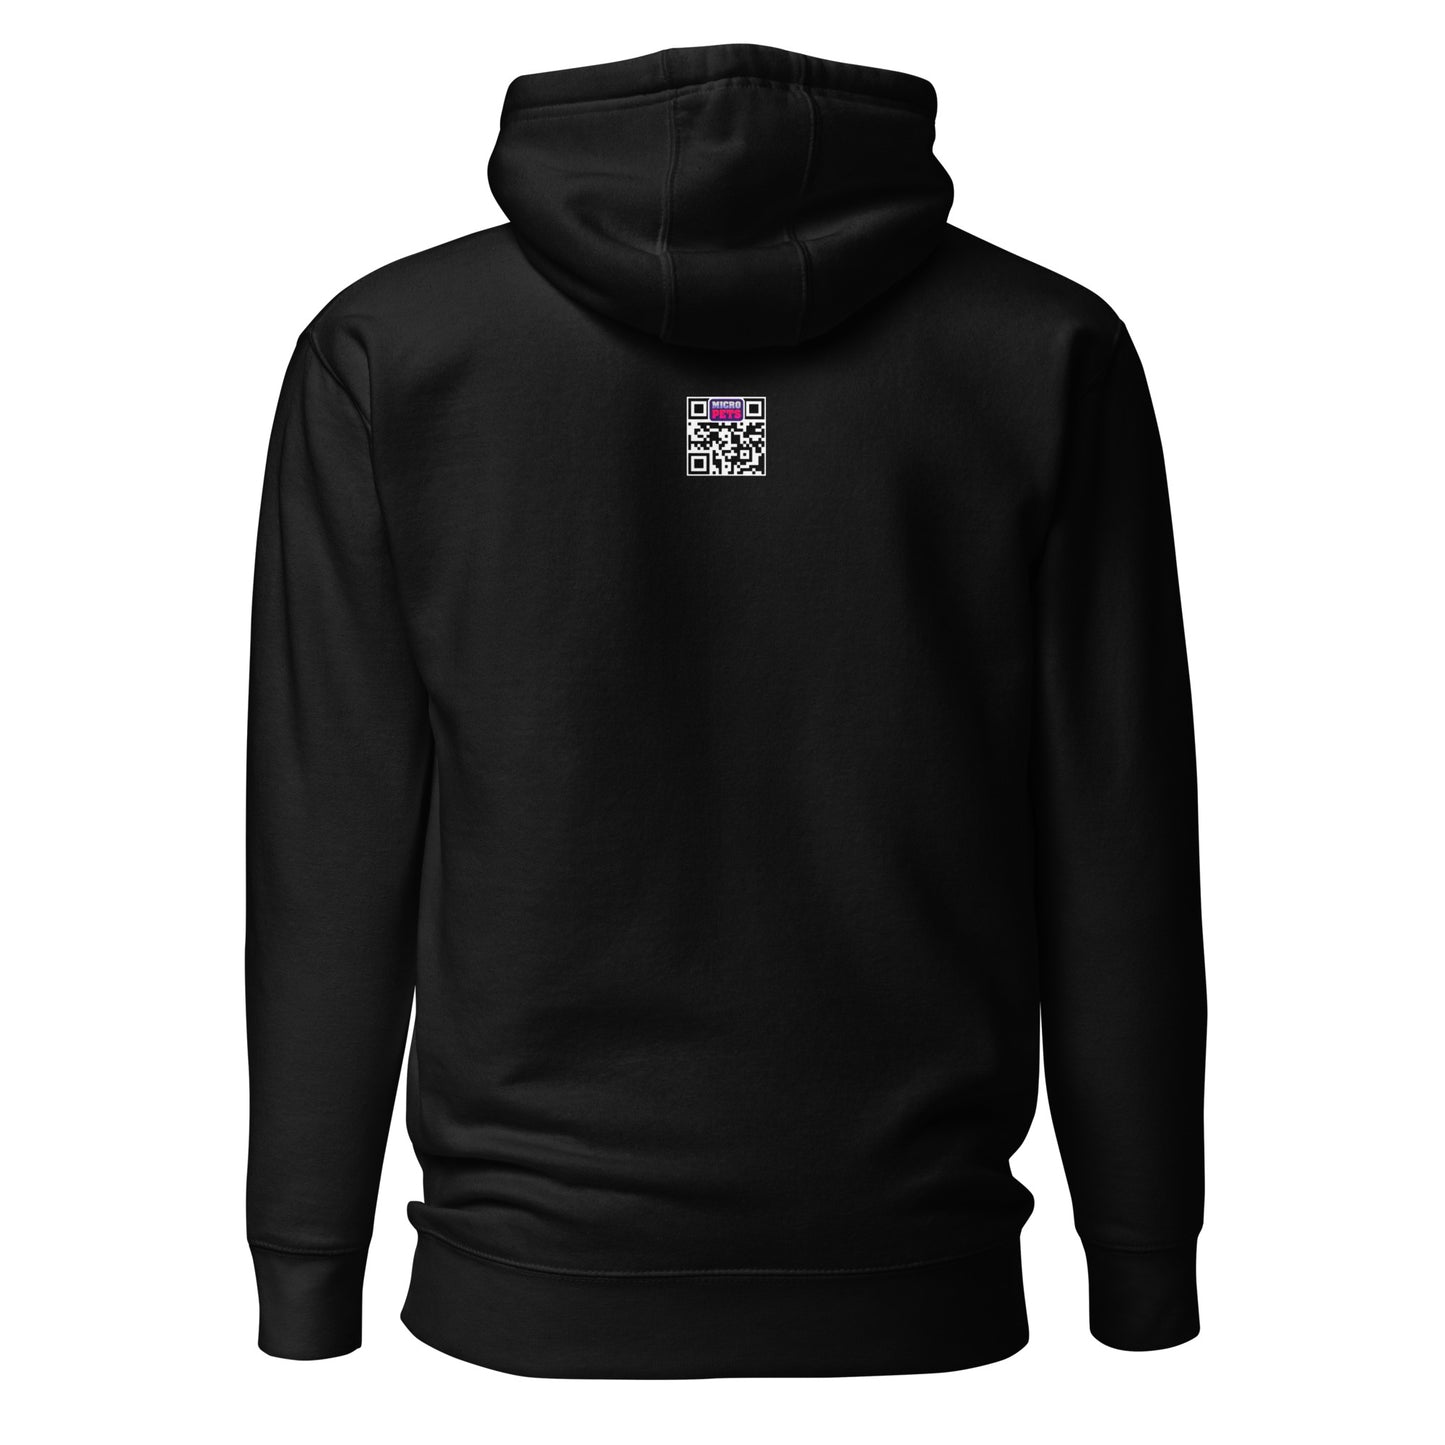 Micropets Embroidered Logo Unisex Hoodie